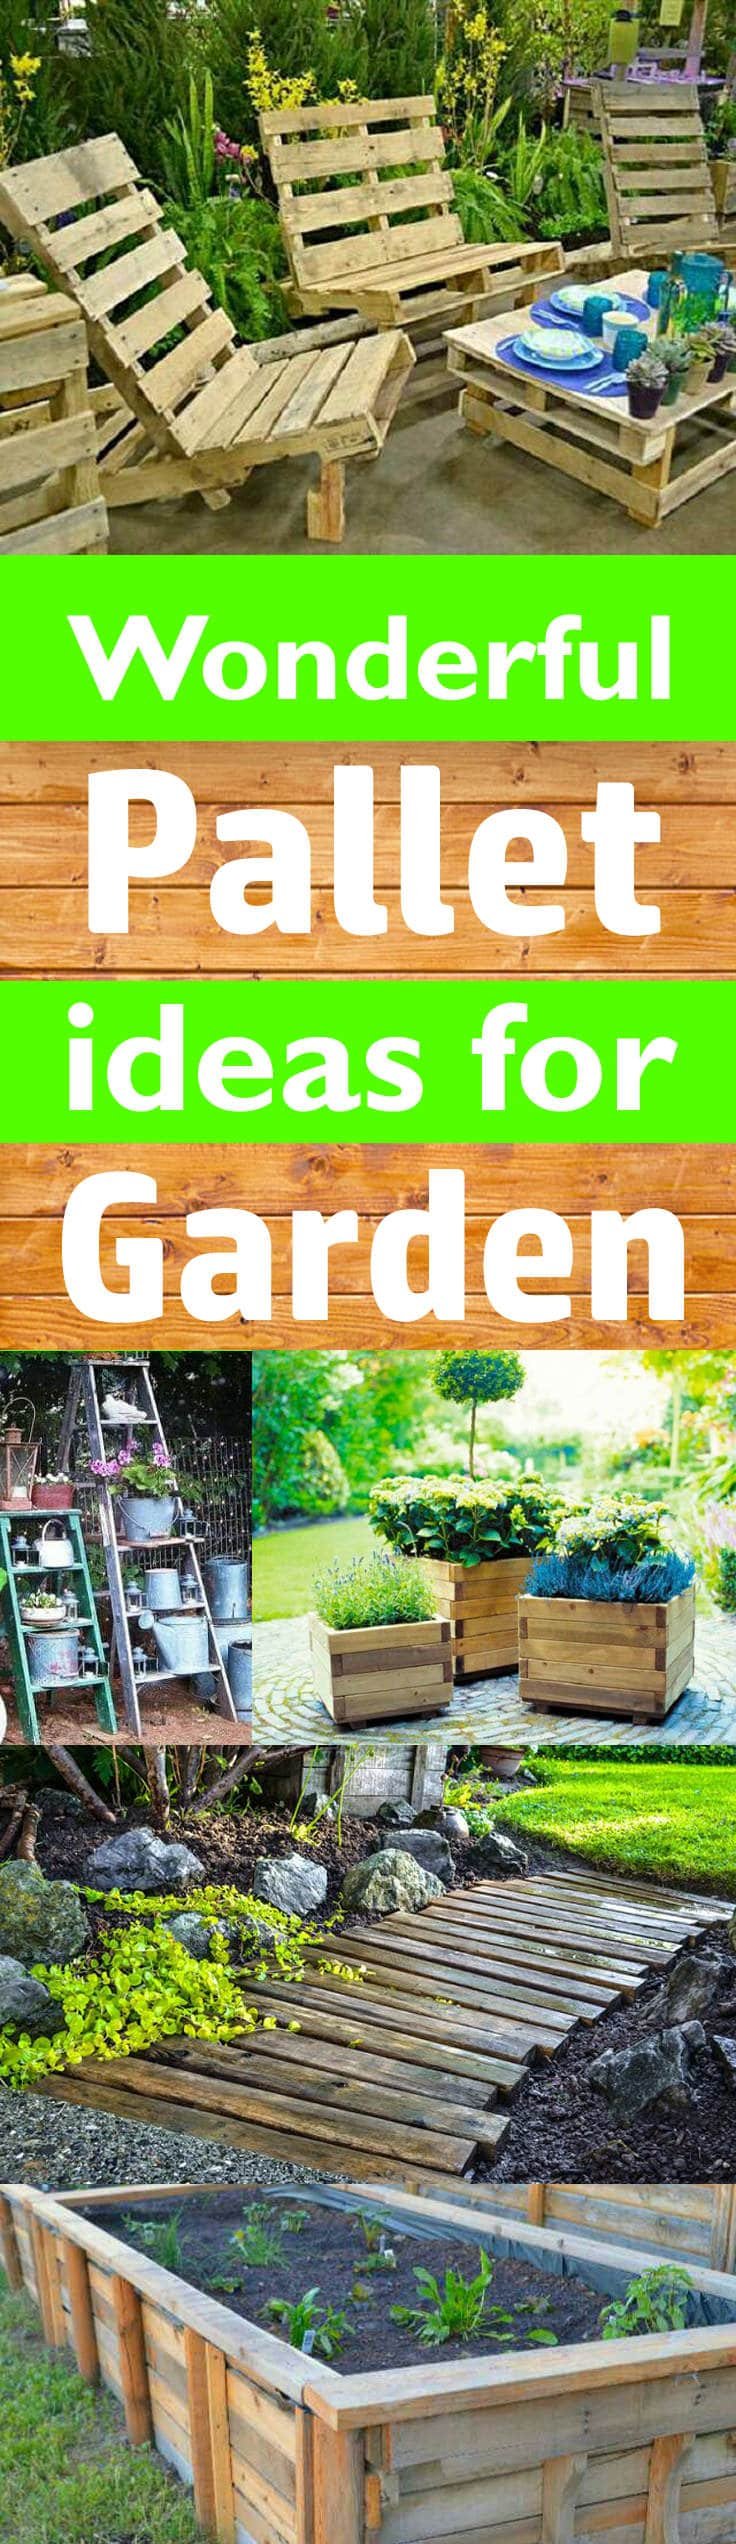 Most of the people throw away or burn wooden pallets, but do you know you can upcycle and make things out of them? With these wonderful pallet ideas for the garden, we'll show you their reuse.